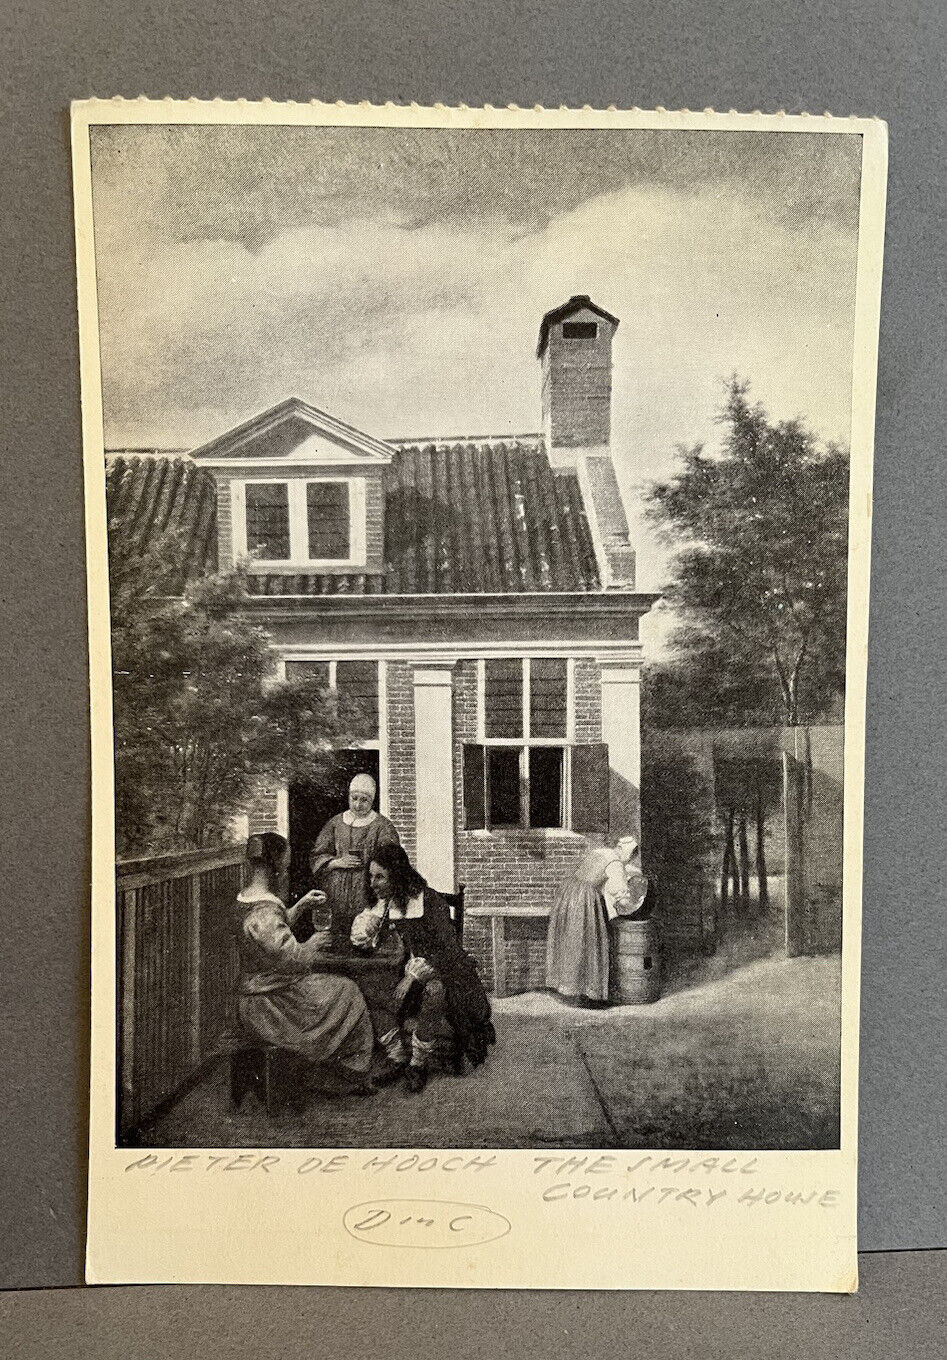 Vintage Pieter De Mooch Postcard “The Small Country Home”